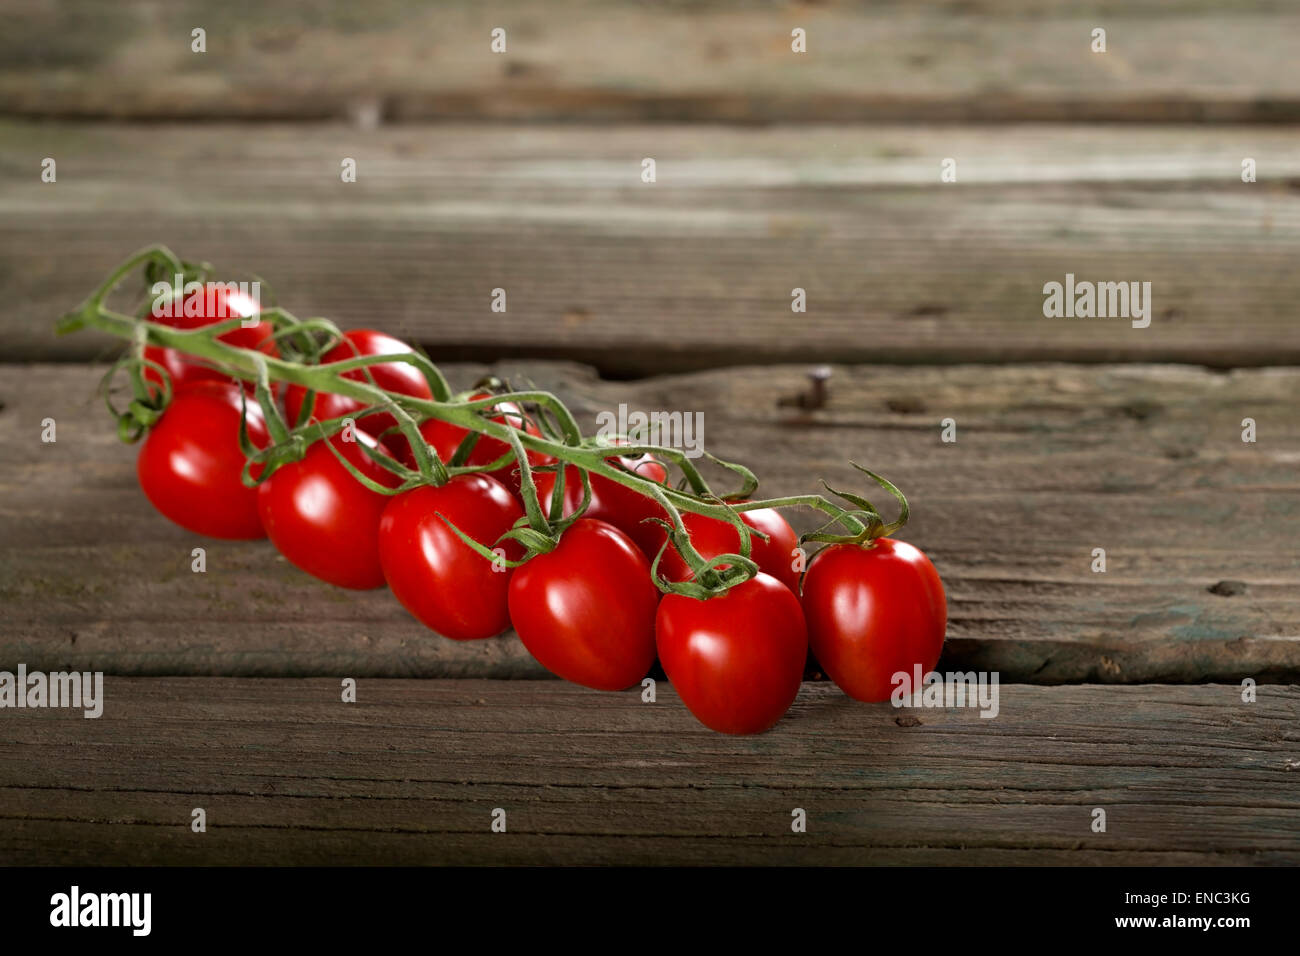 Some cherry tomatoes on a wooden surface Stock Photo